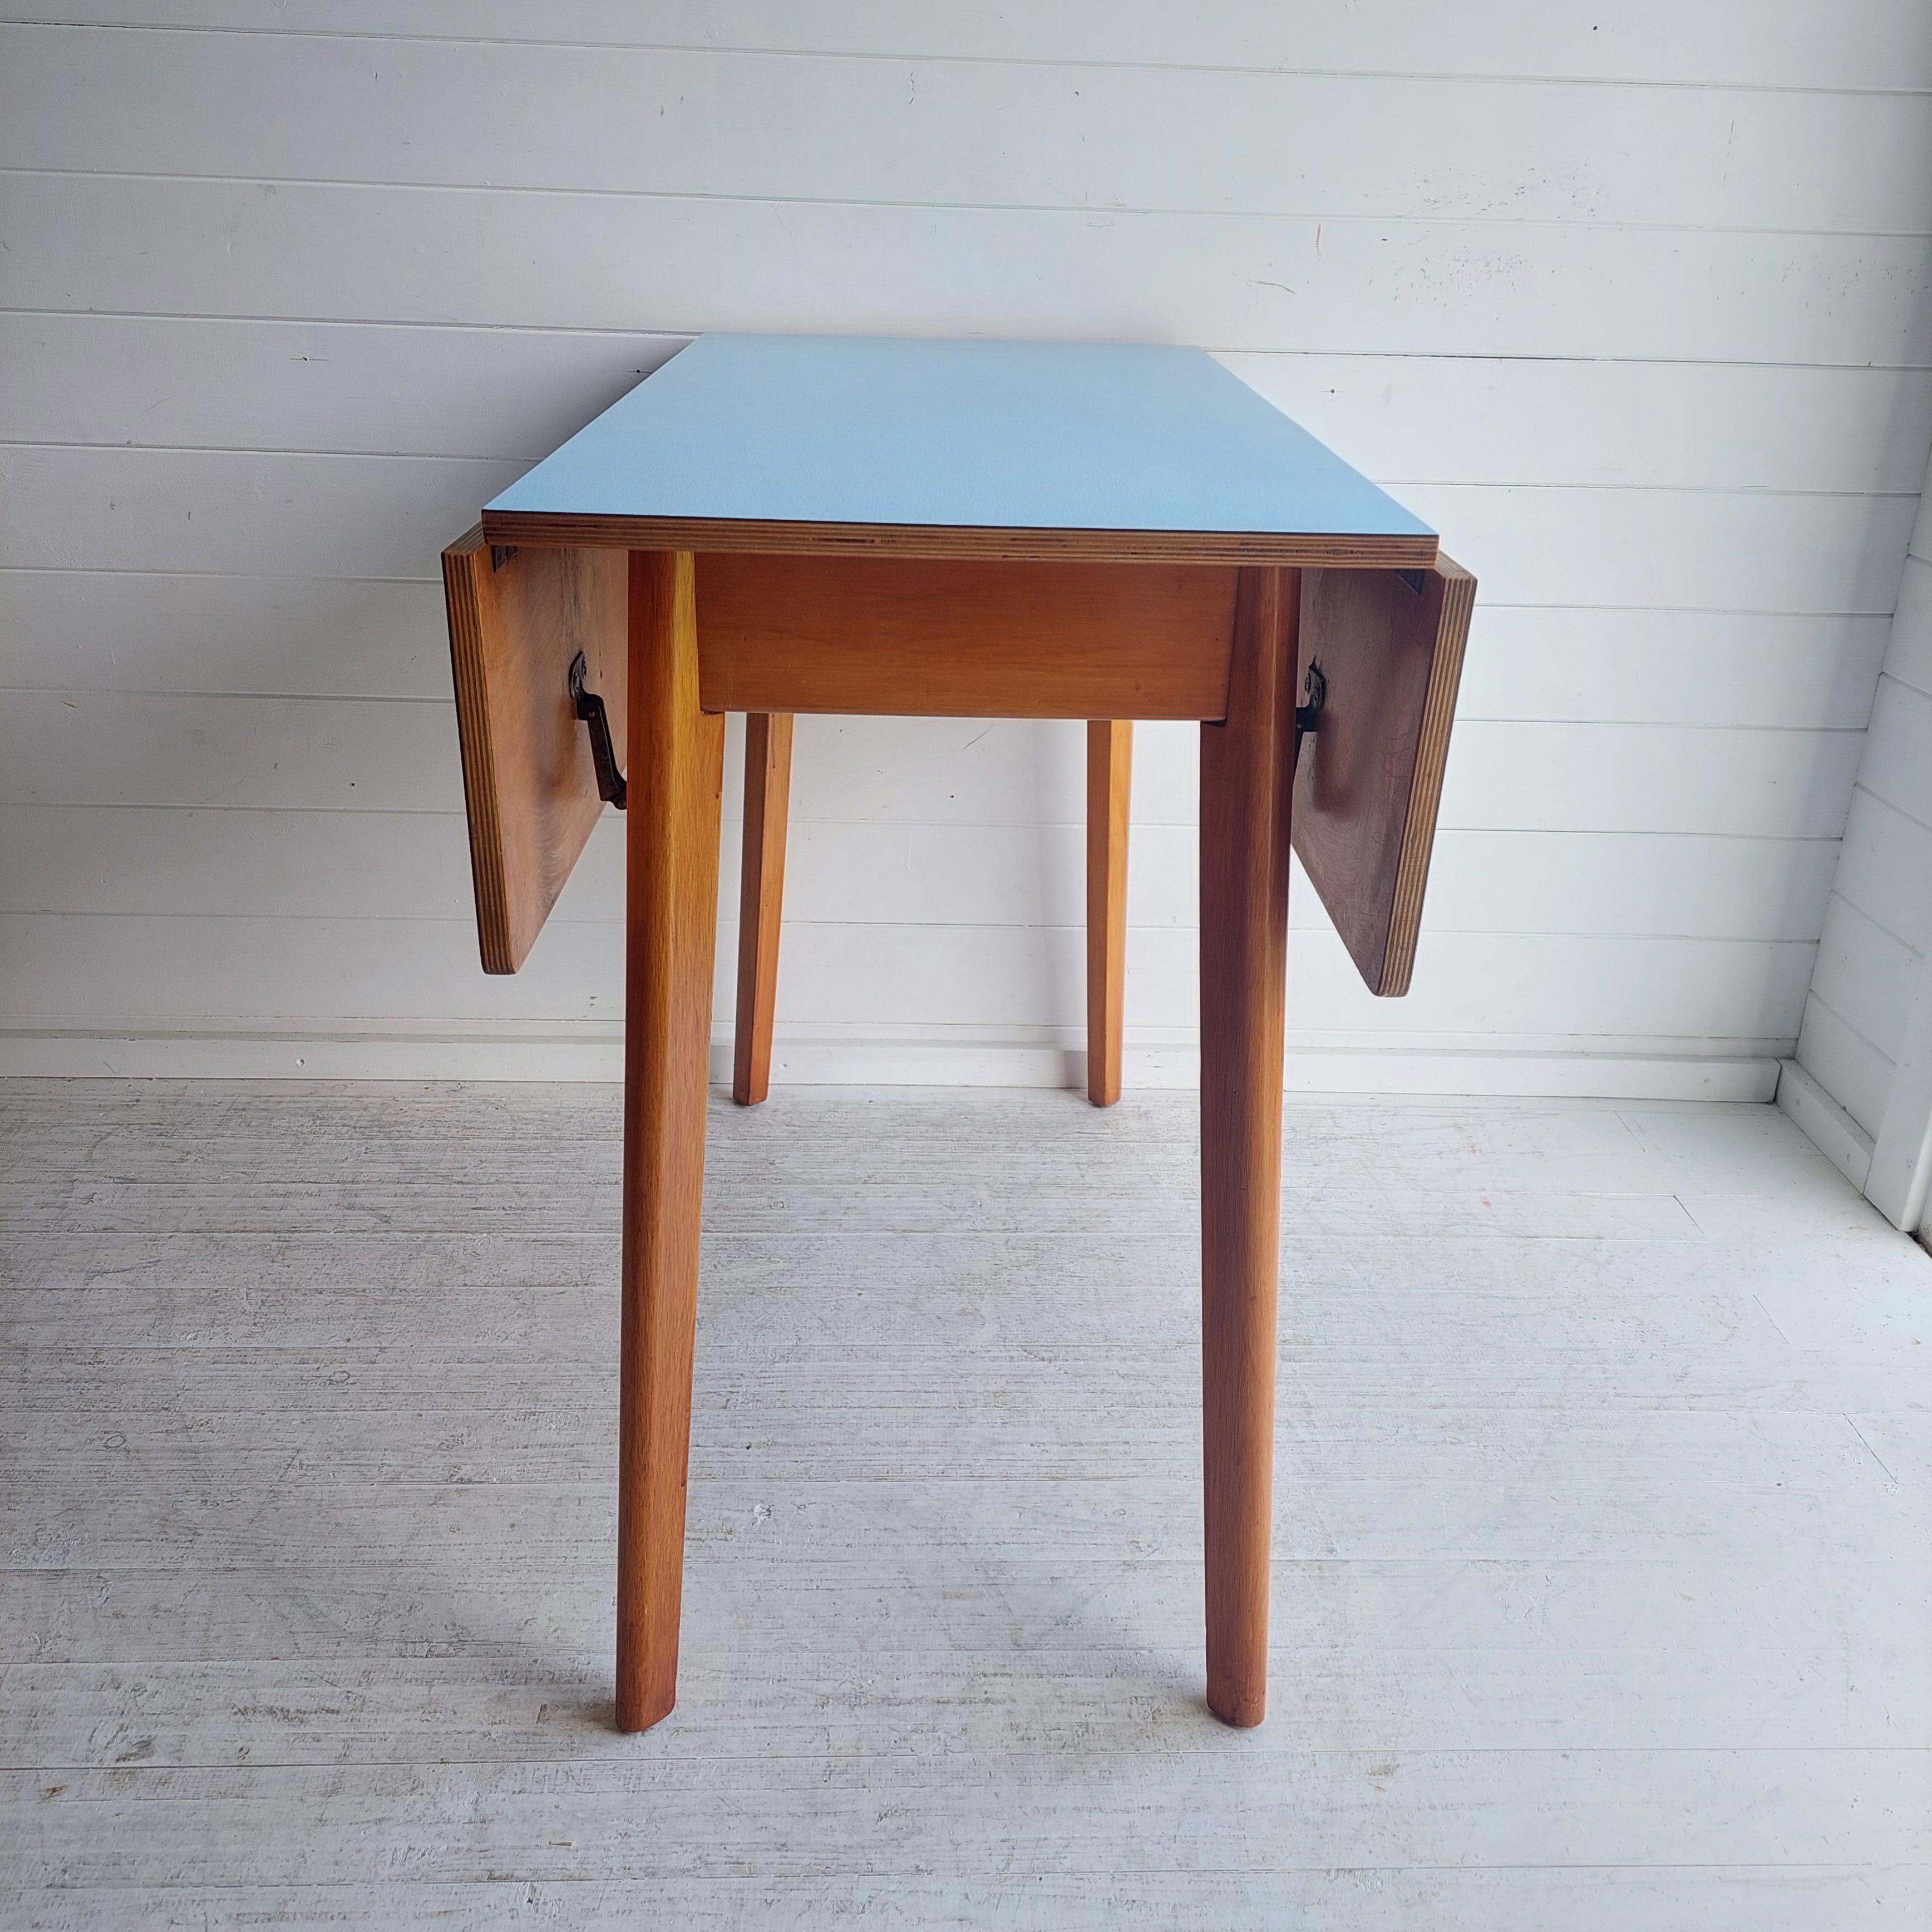 20th Century Mid Century Blue Formica Drop Leaf Kitchen Dining Table With Wooden Legs 60s